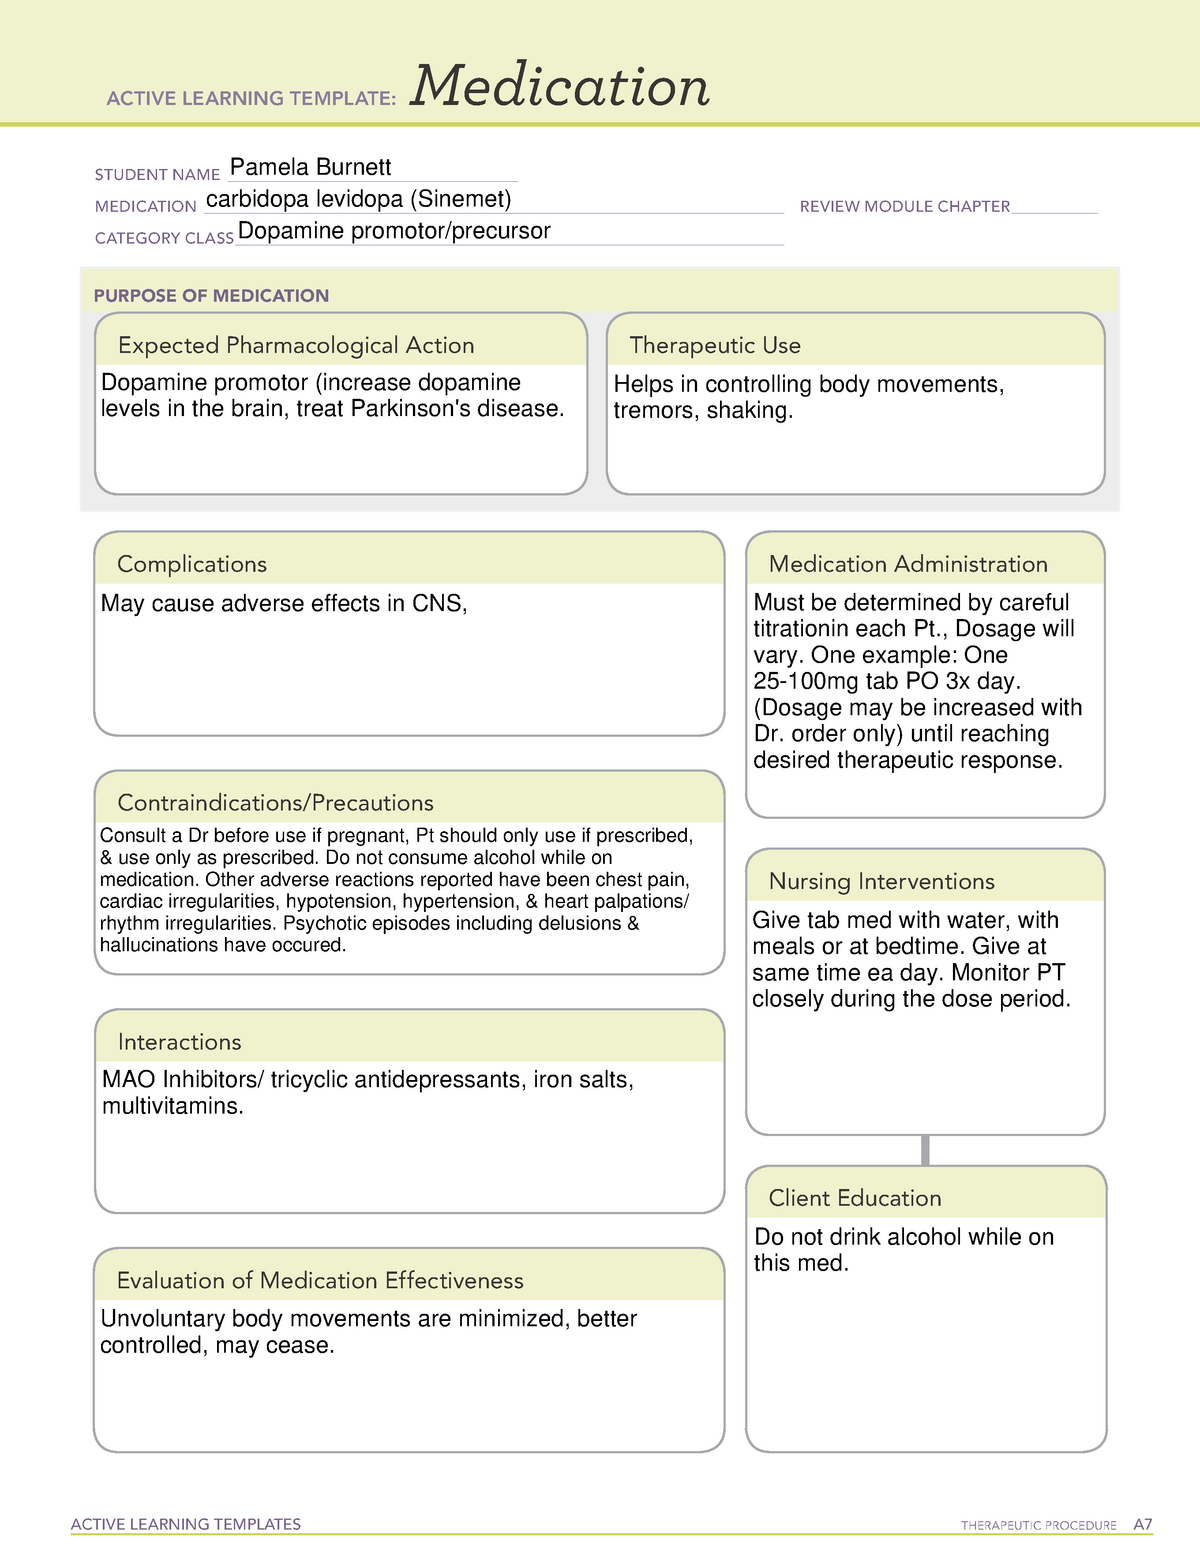 Carbiopa levodopa med sheet ACTIVE LEARNING TEMPLATES THERAPEUTIC